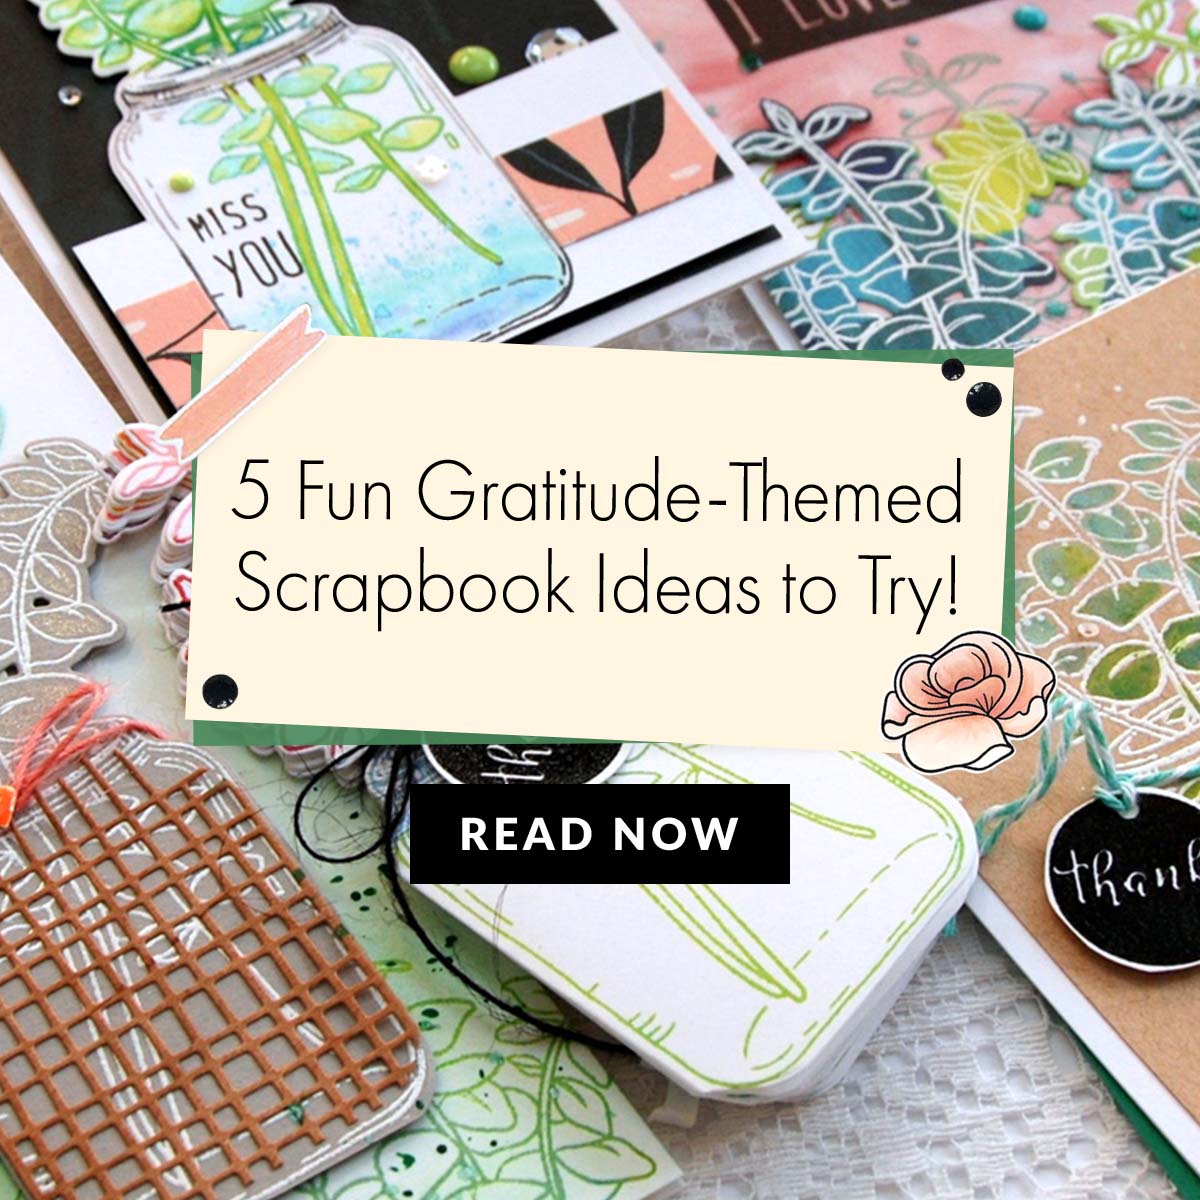 Travel Down Memory Lane with This Technique-Filled Scrapbooking Workshop!